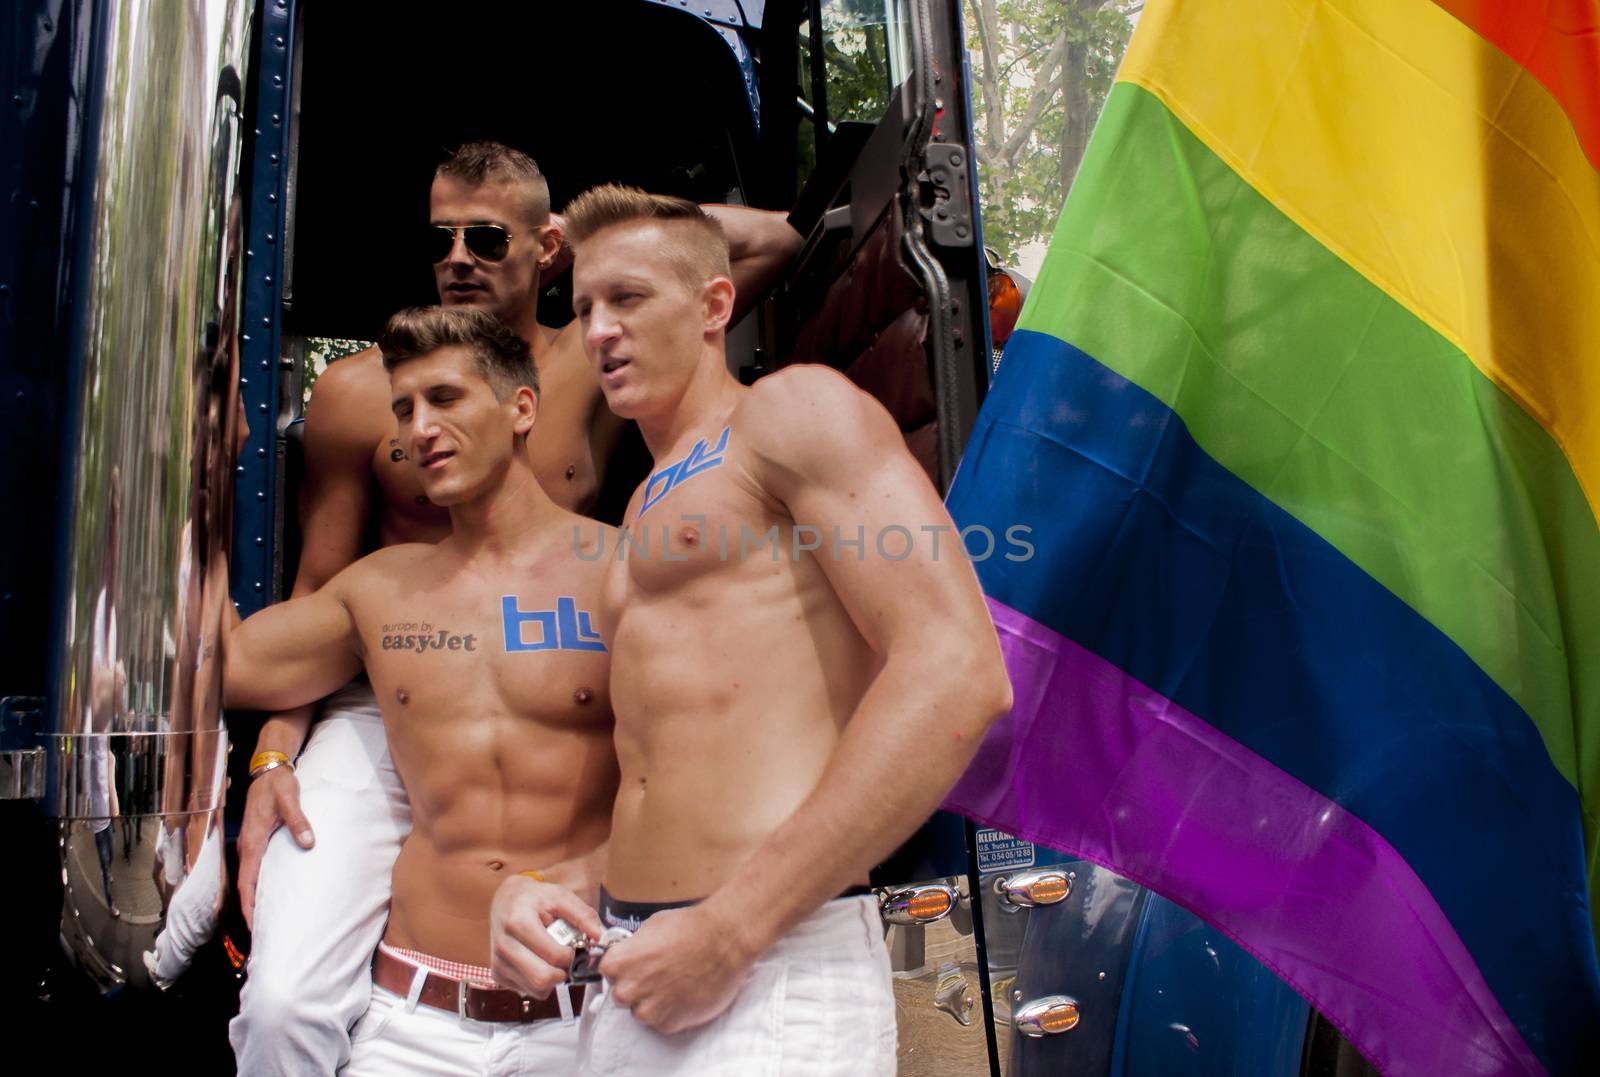 BERLIN, GERMANY - JUNE 21, 2014:Christopher Street Day.An unidentified participants at the gay pride, posing for pictures.  Crowd of people participate in the parade celebrates gays, lesbians, bisexuals and transgenders in Berlin.